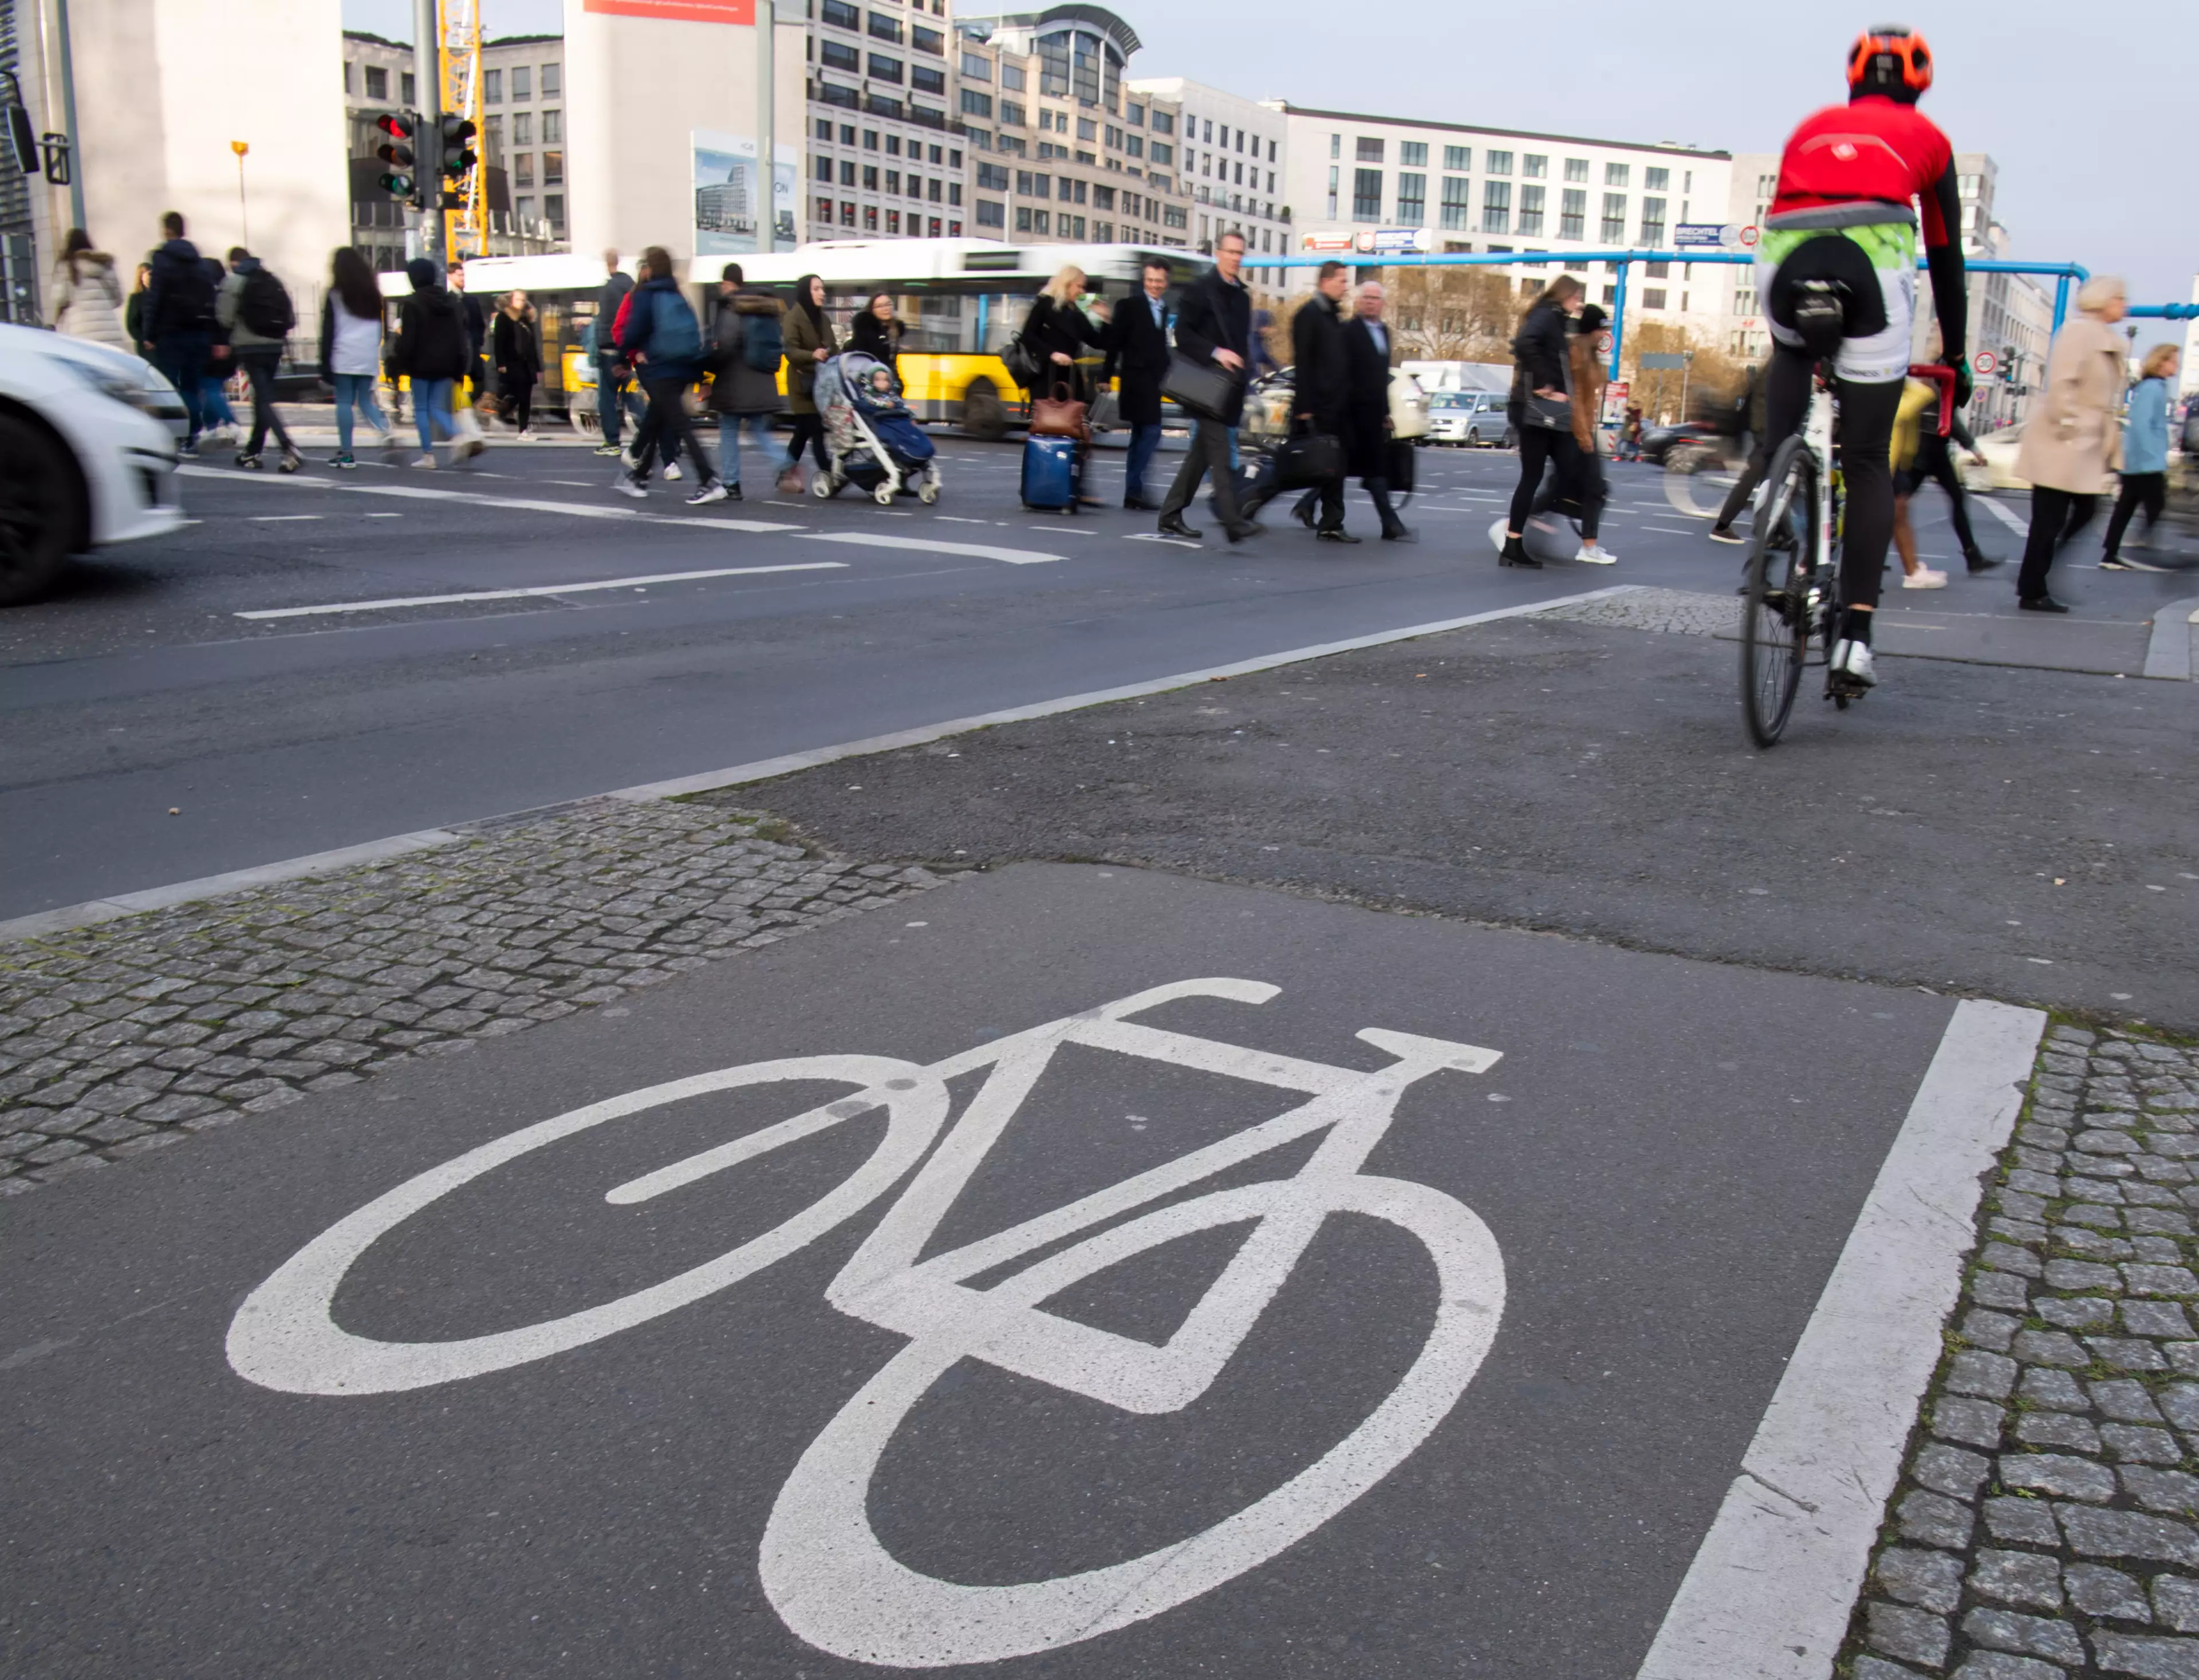 Some countries in Europe are way ahead on cycle lanes.